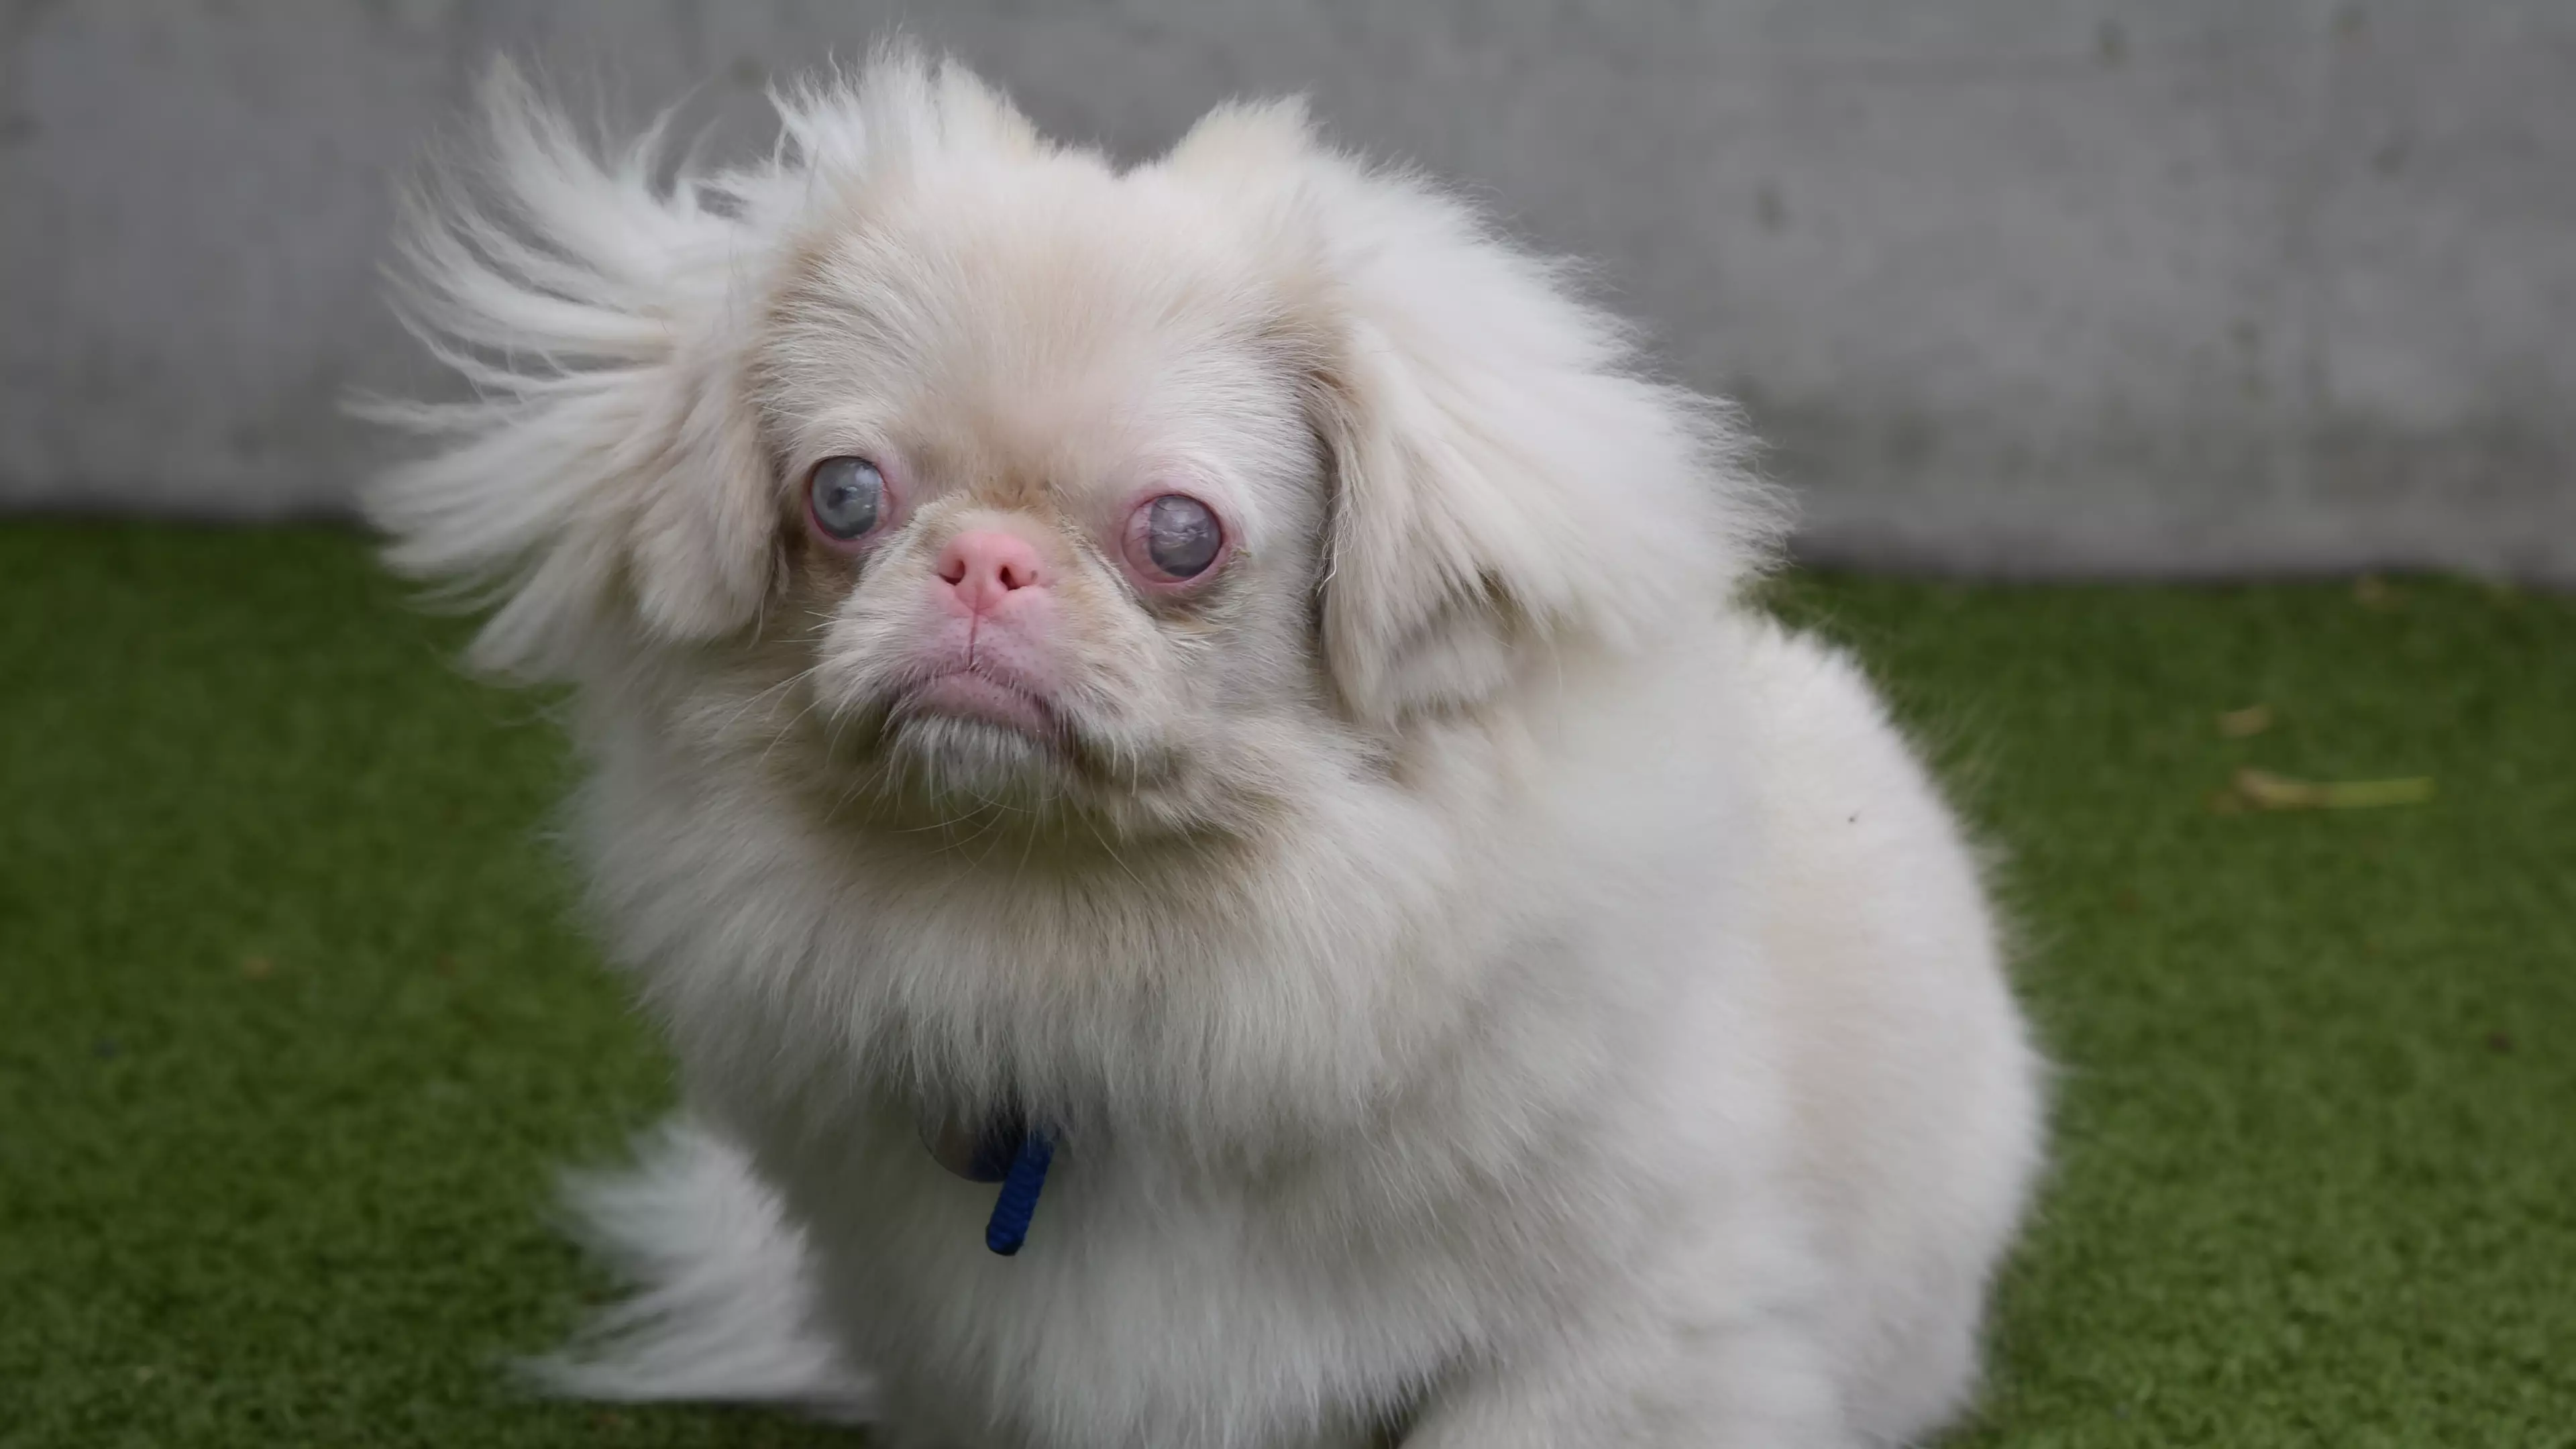 Albino Dog Proves Beauty Is Only Skin Deep On 'For the Love of Dogs'